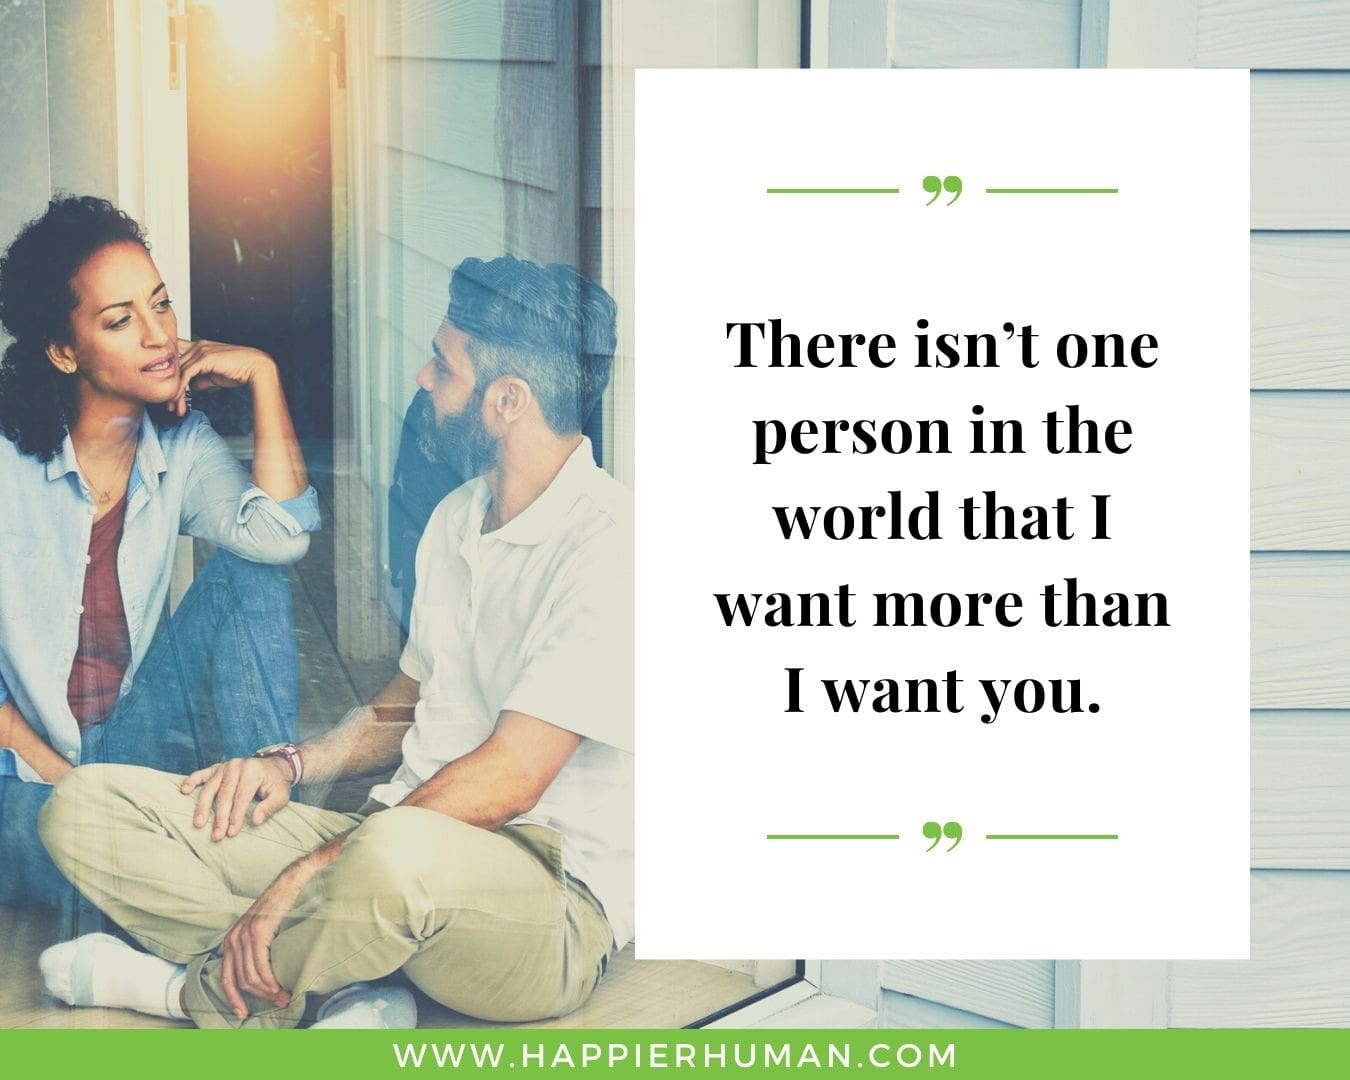 Deep Romantic Quotes- “There isn’t one person in the world that I want more than I want you.”